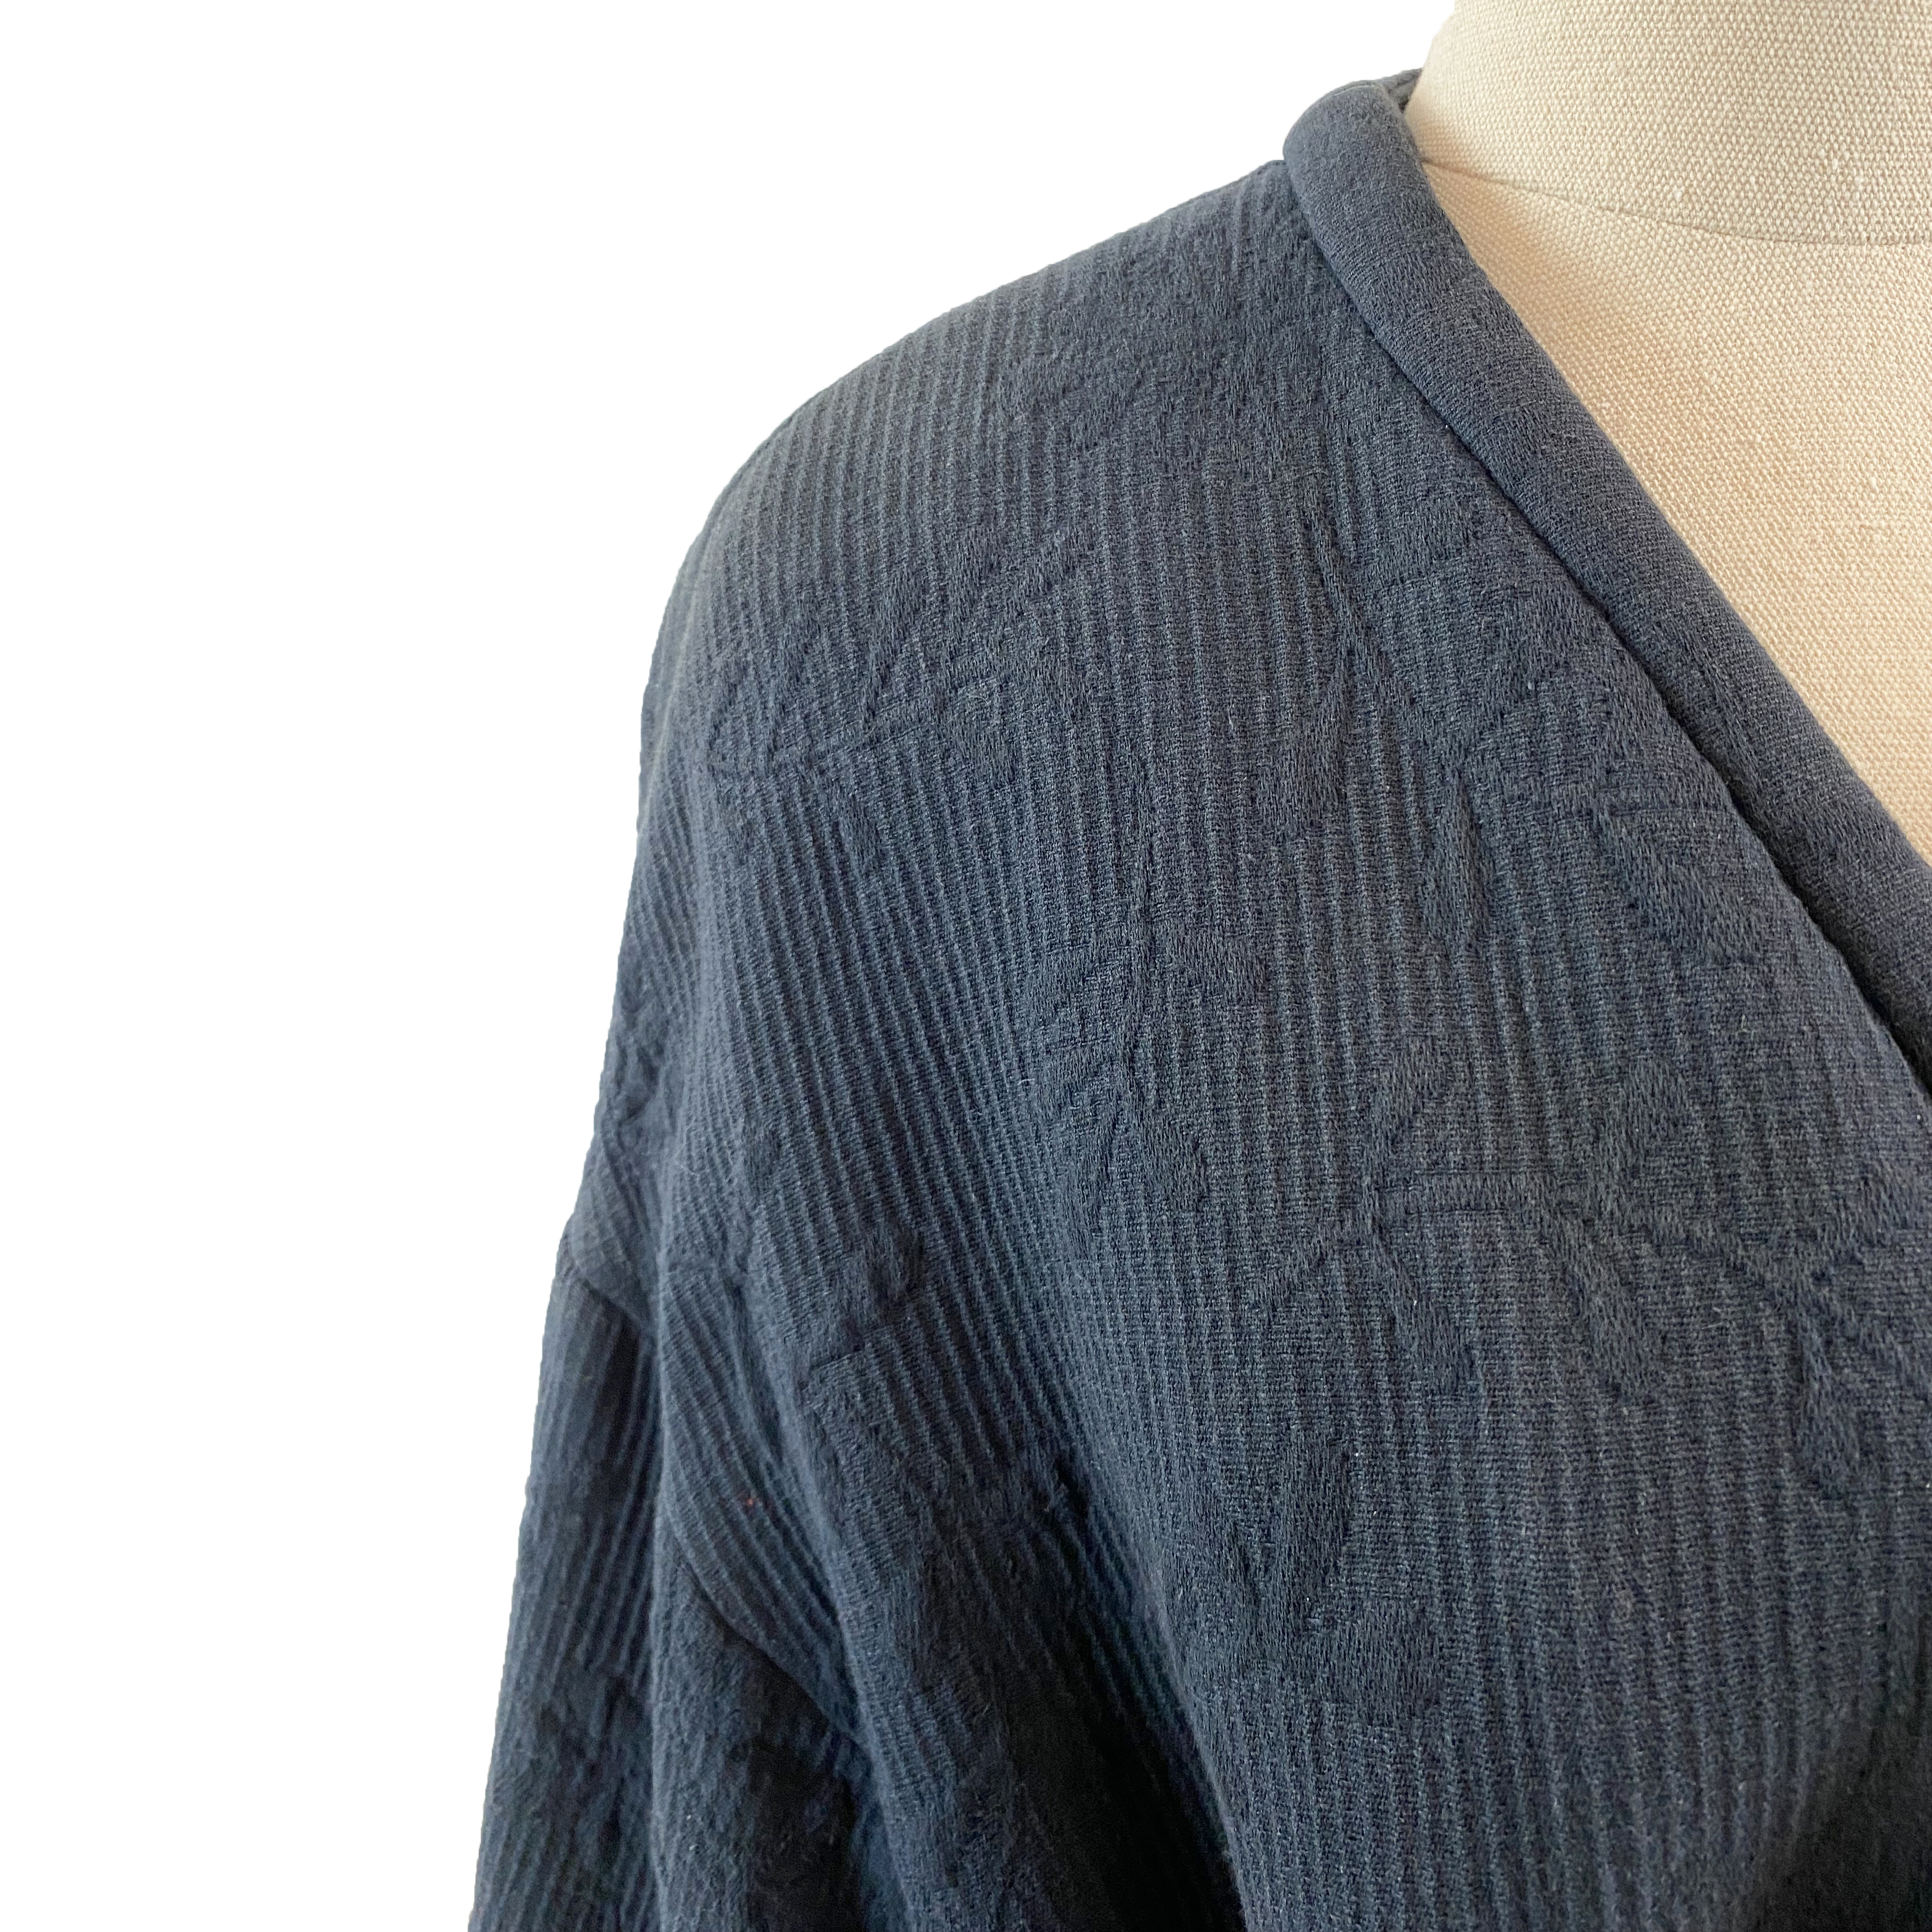 Gorman Navy Jacquard Relaxed-Fit Jacket